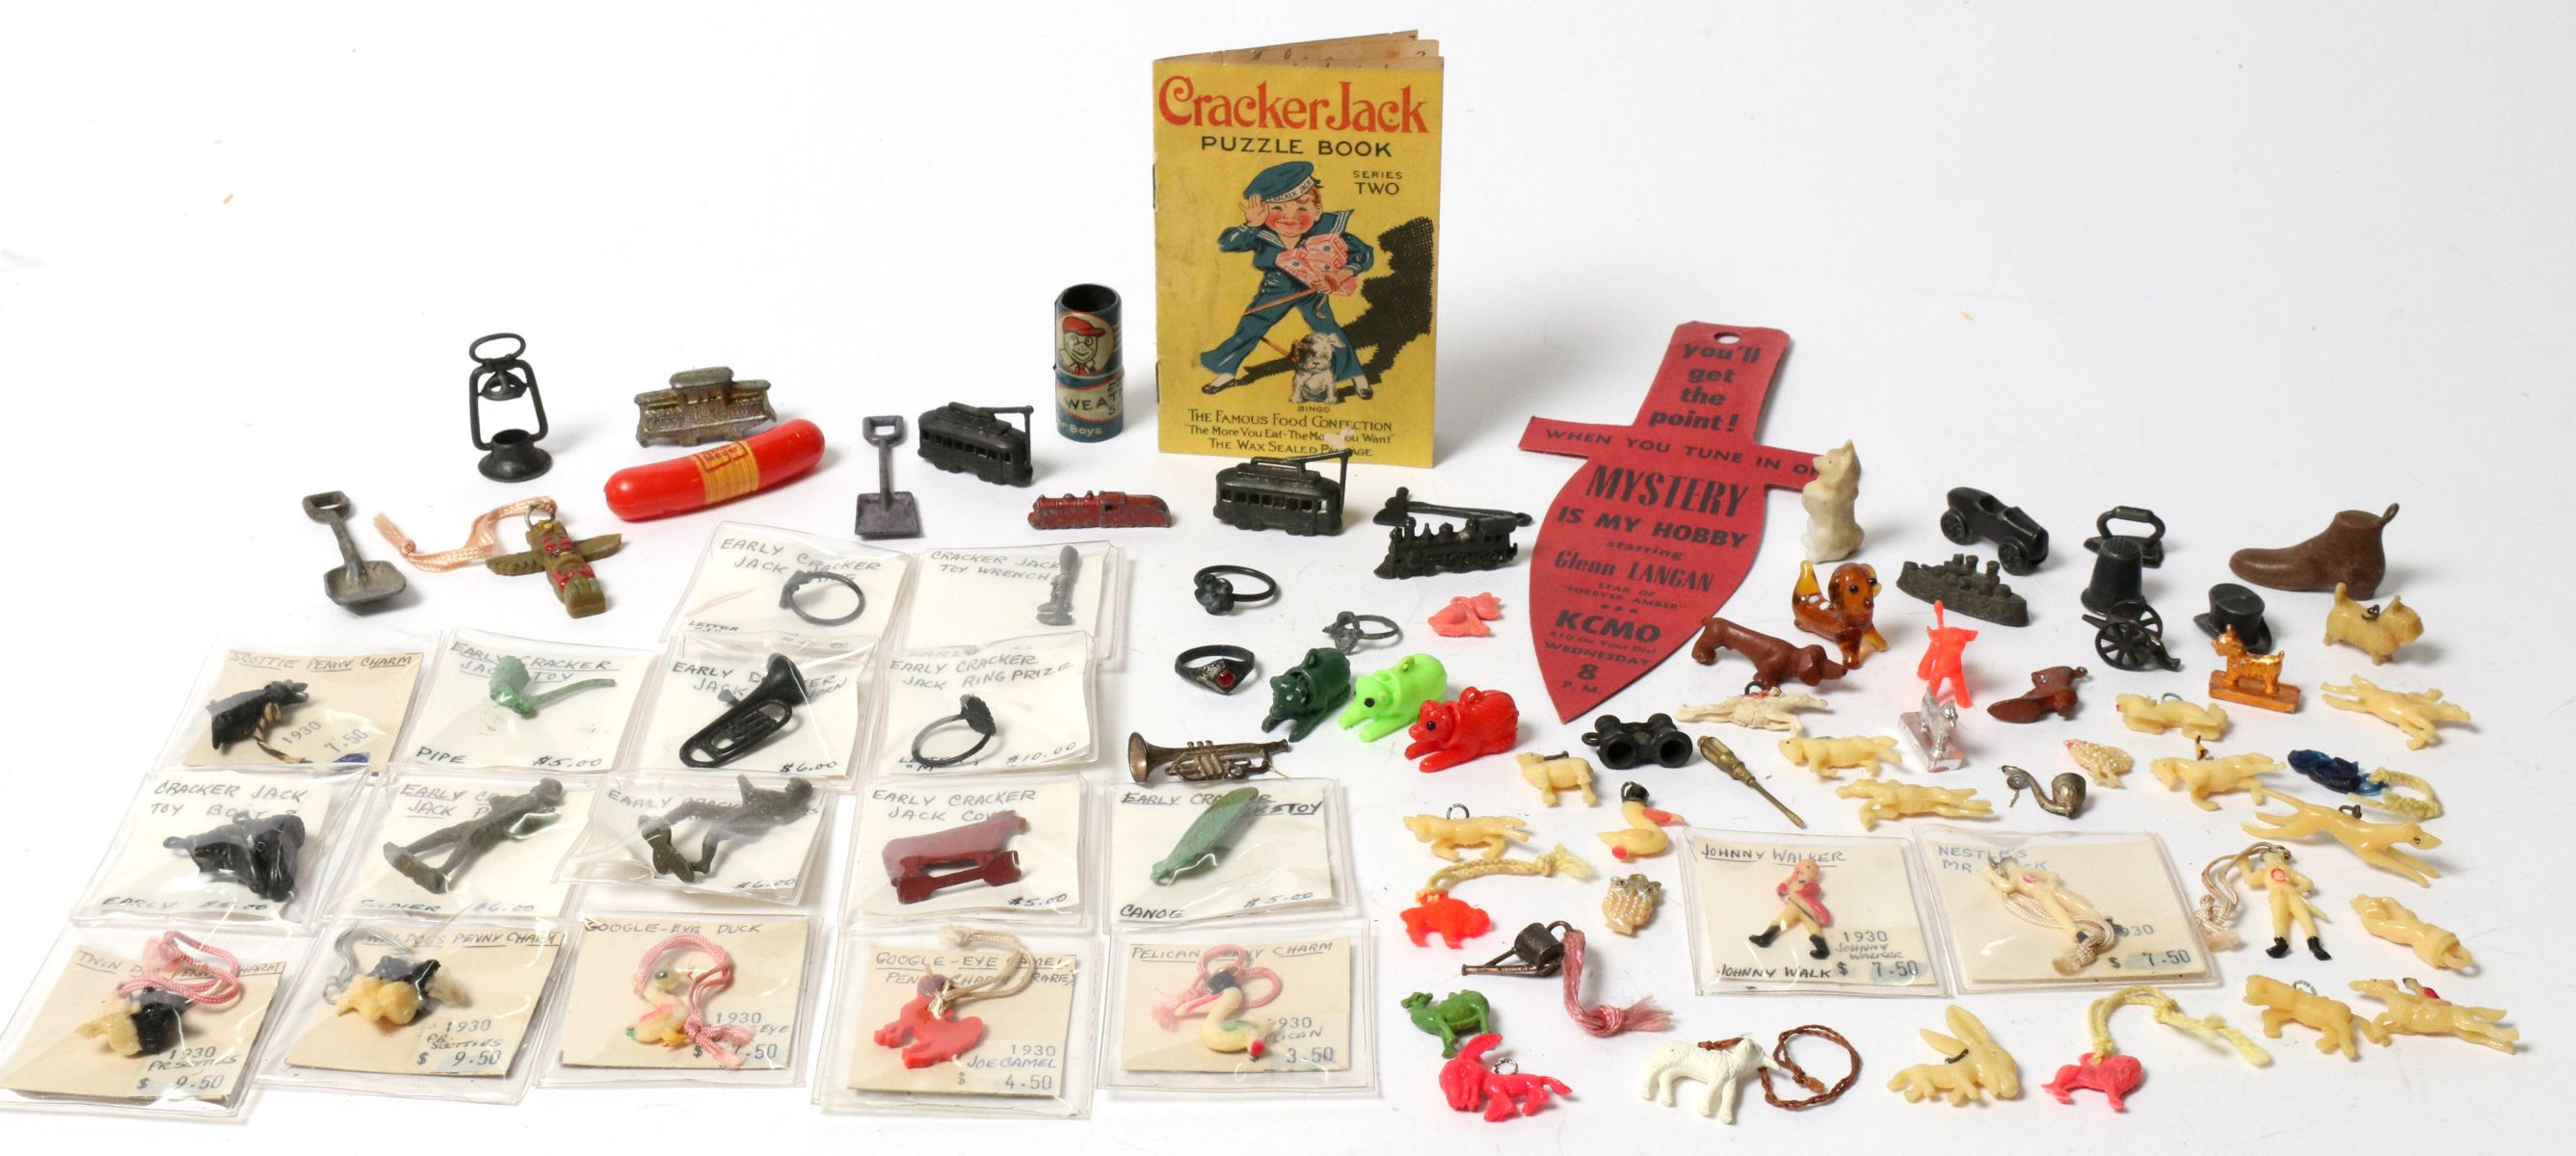 CRACKER JACK AND OTHER COLLECTIBLES